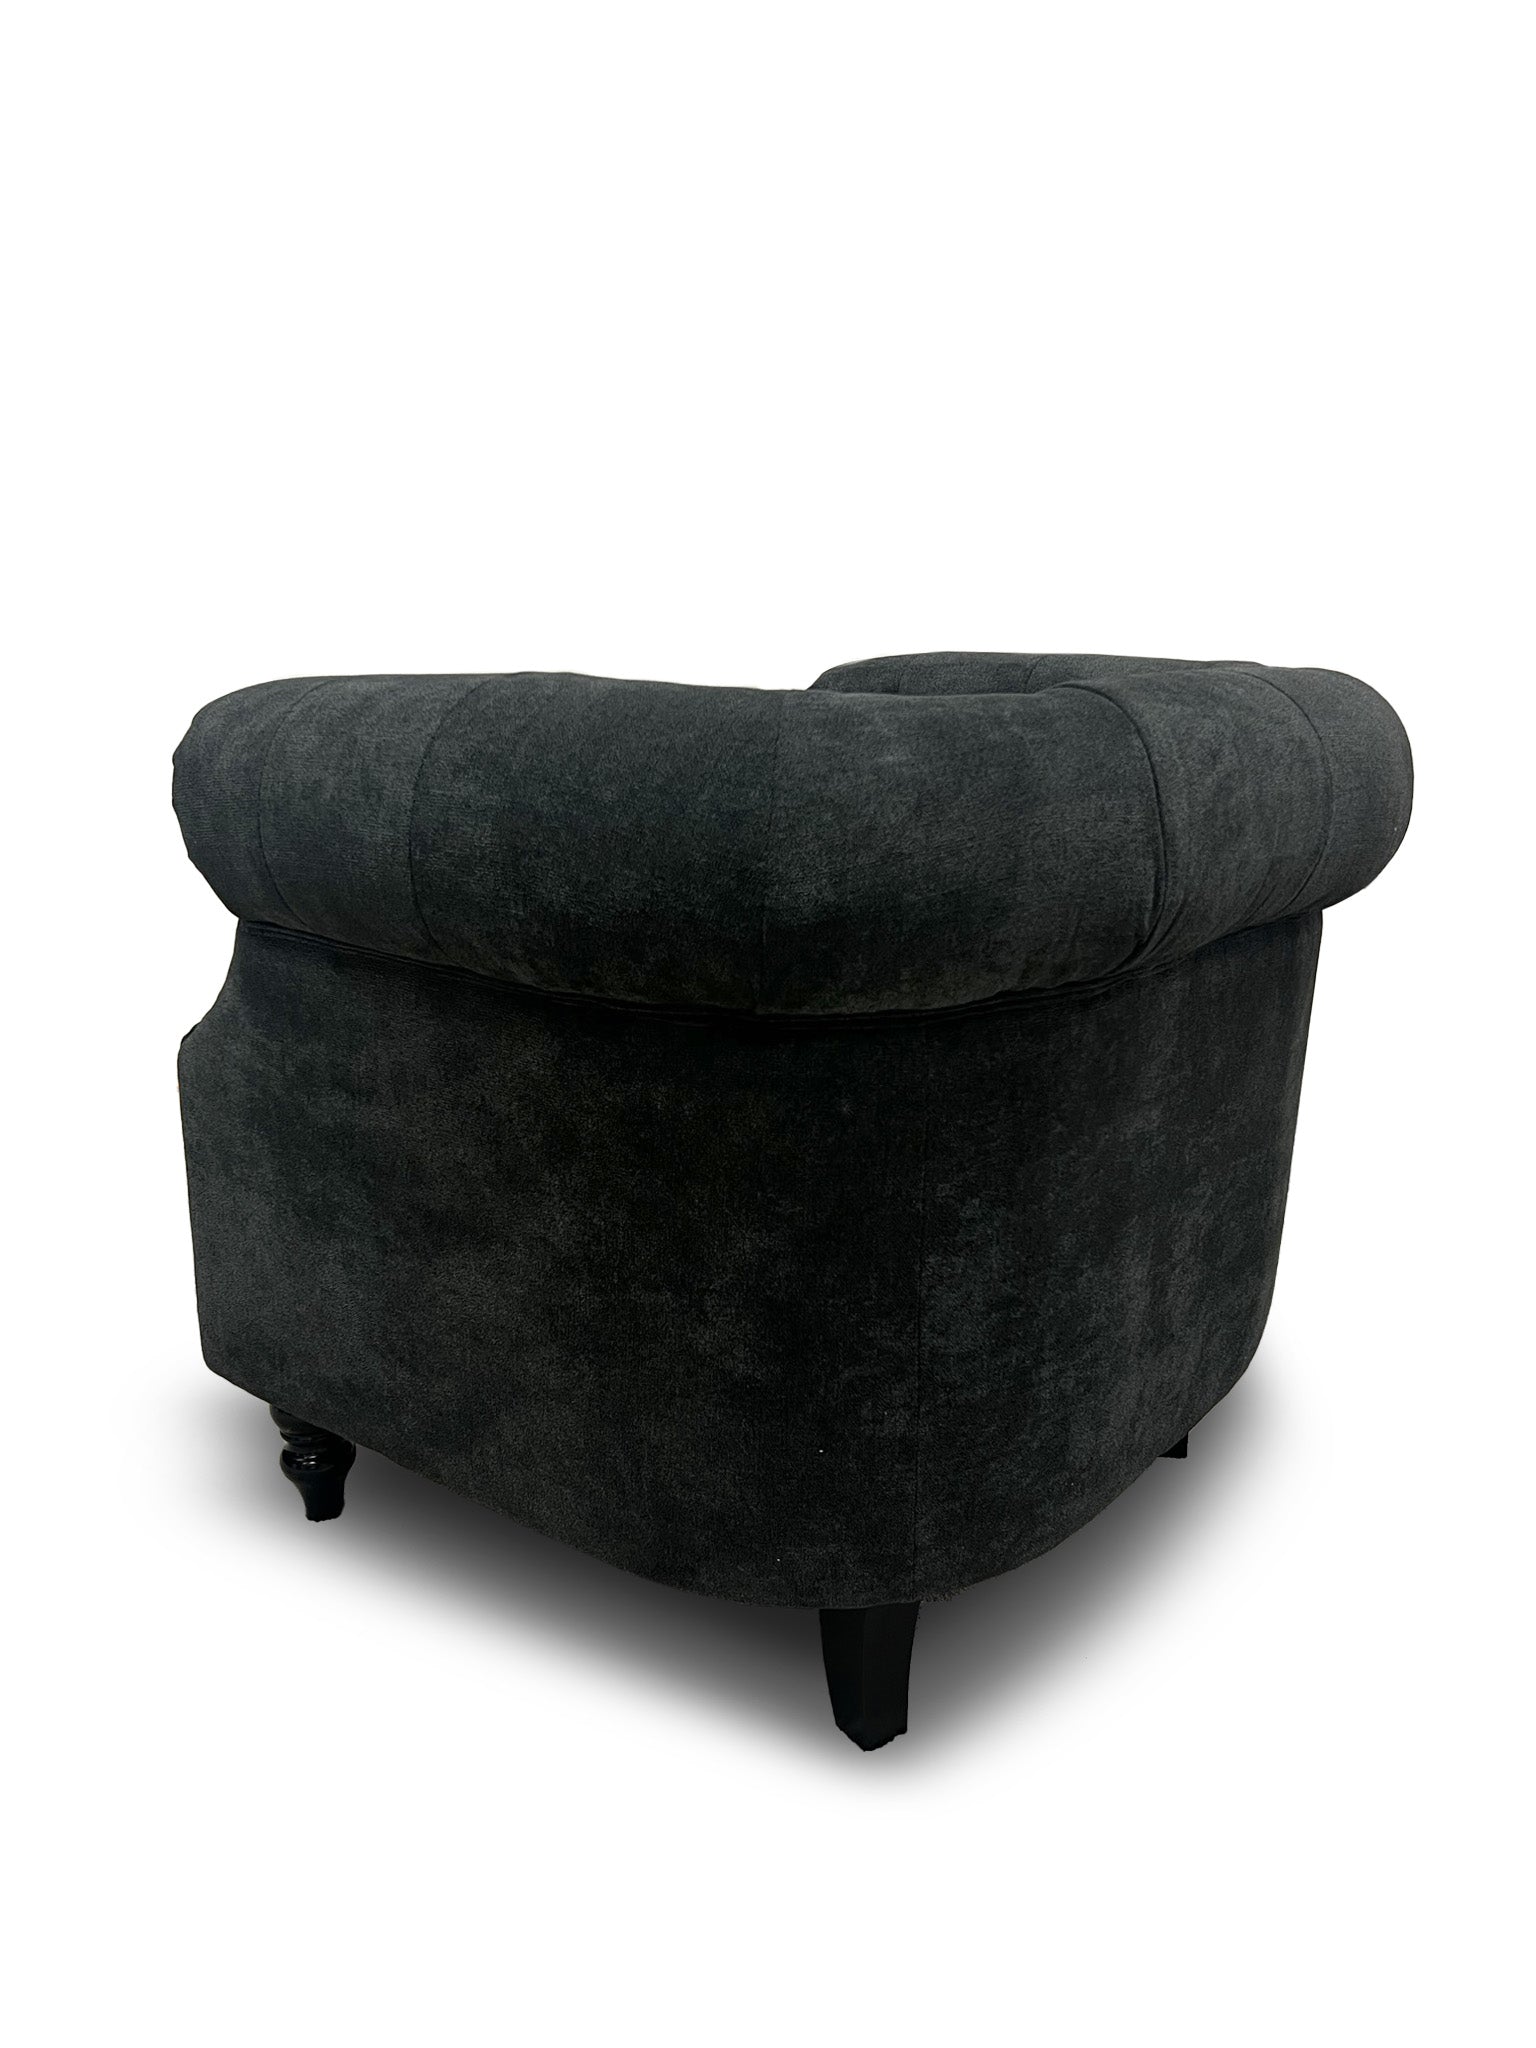 Belle accent chair in black